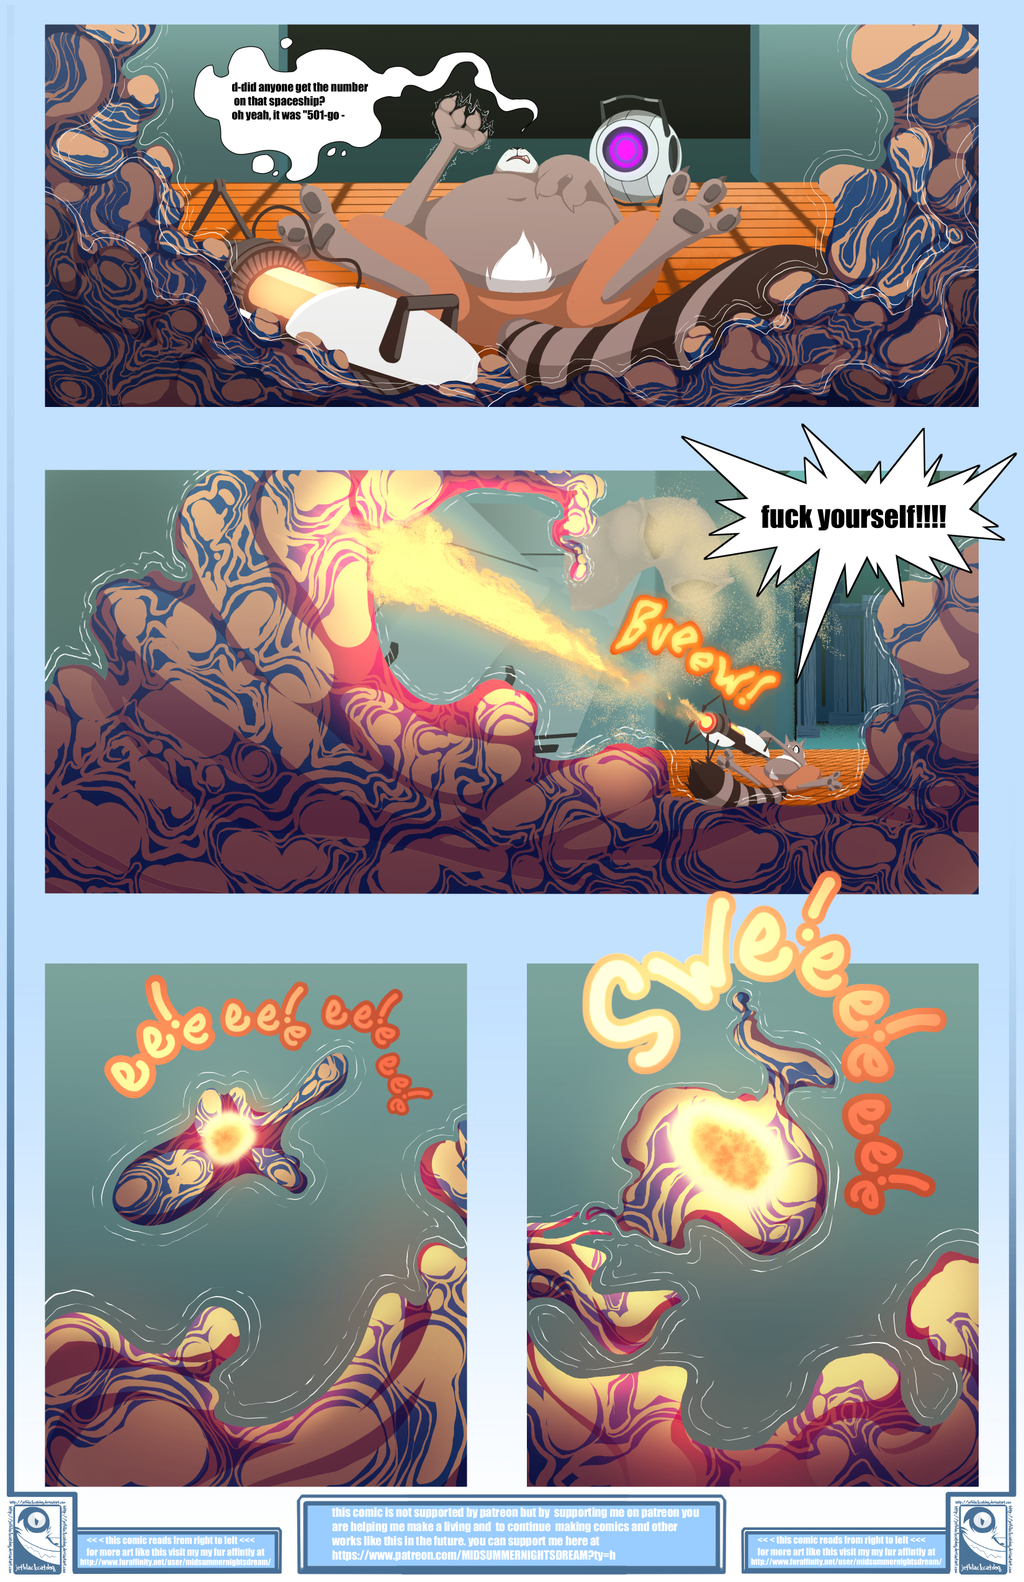 portal comic page 6 of 20 finished